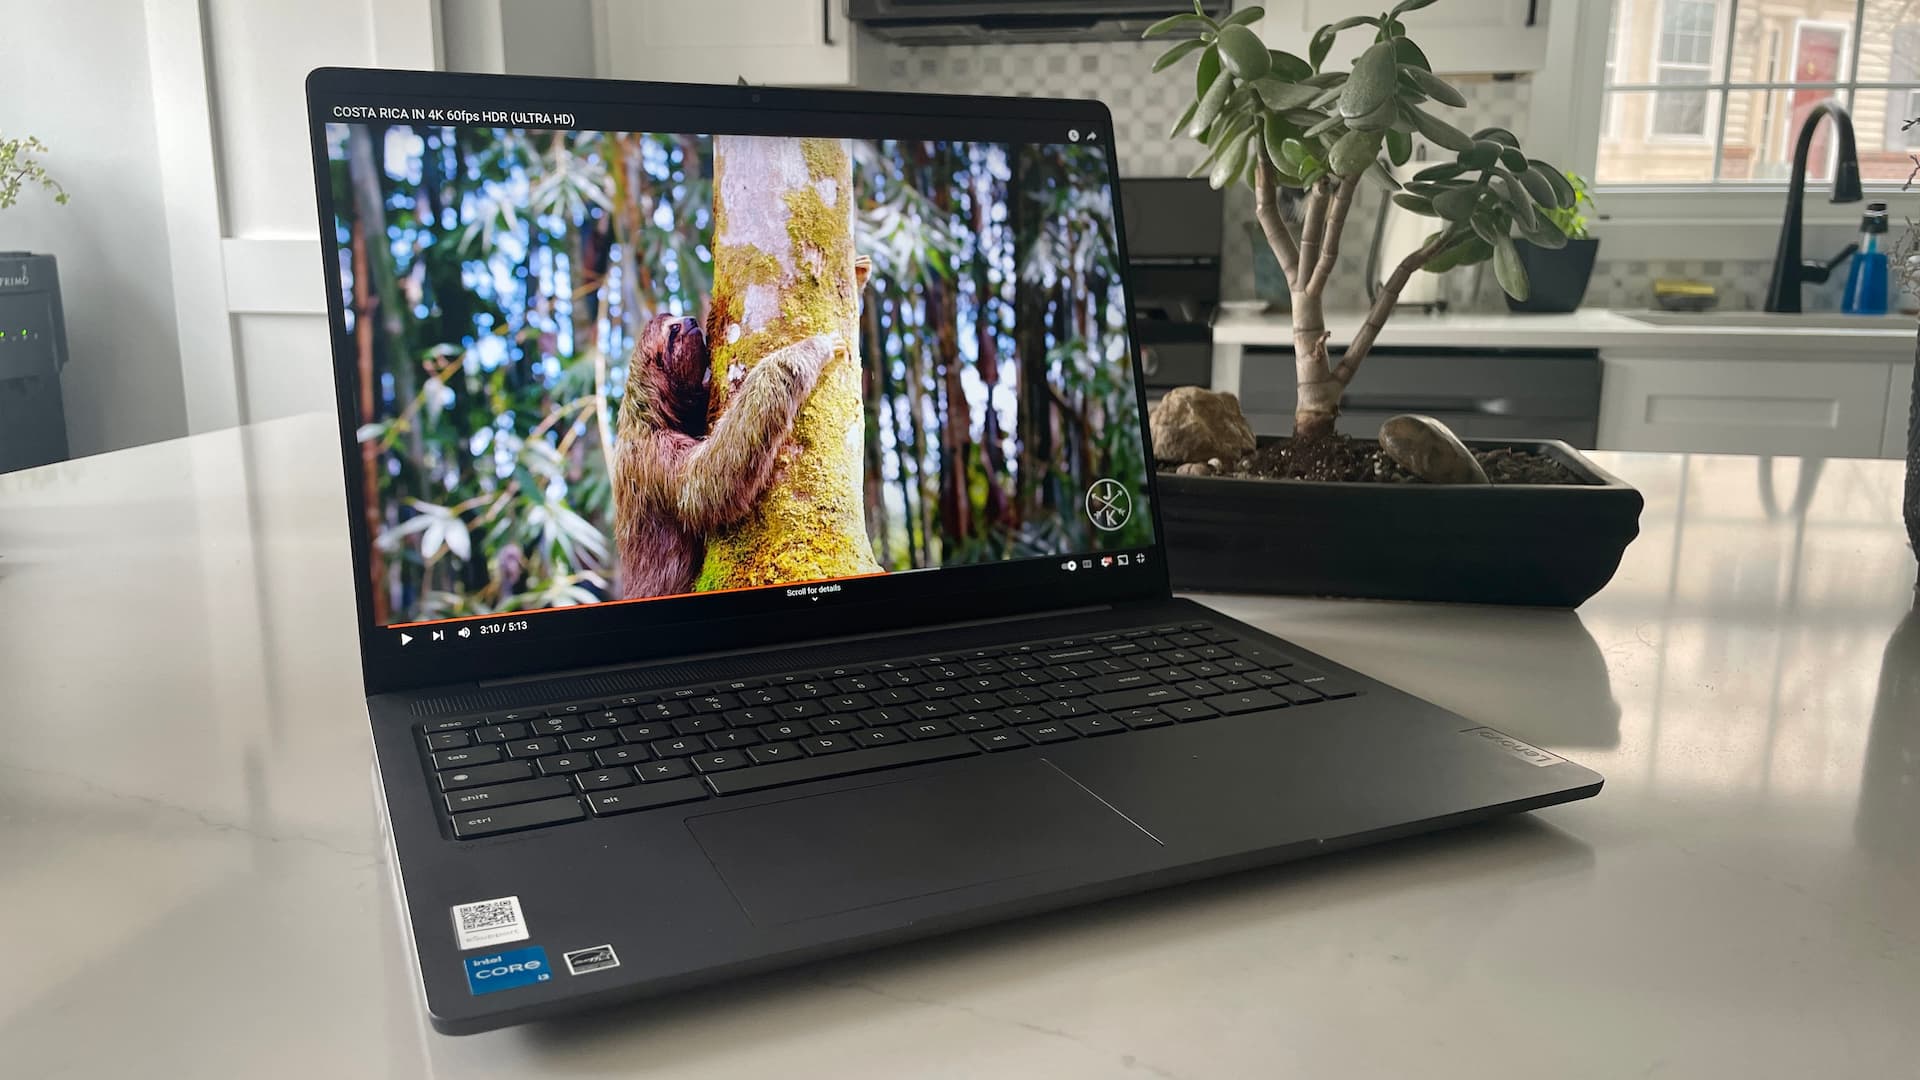 There’s a big discount on the Lenovo 5i Chromebook. Is it worth it?